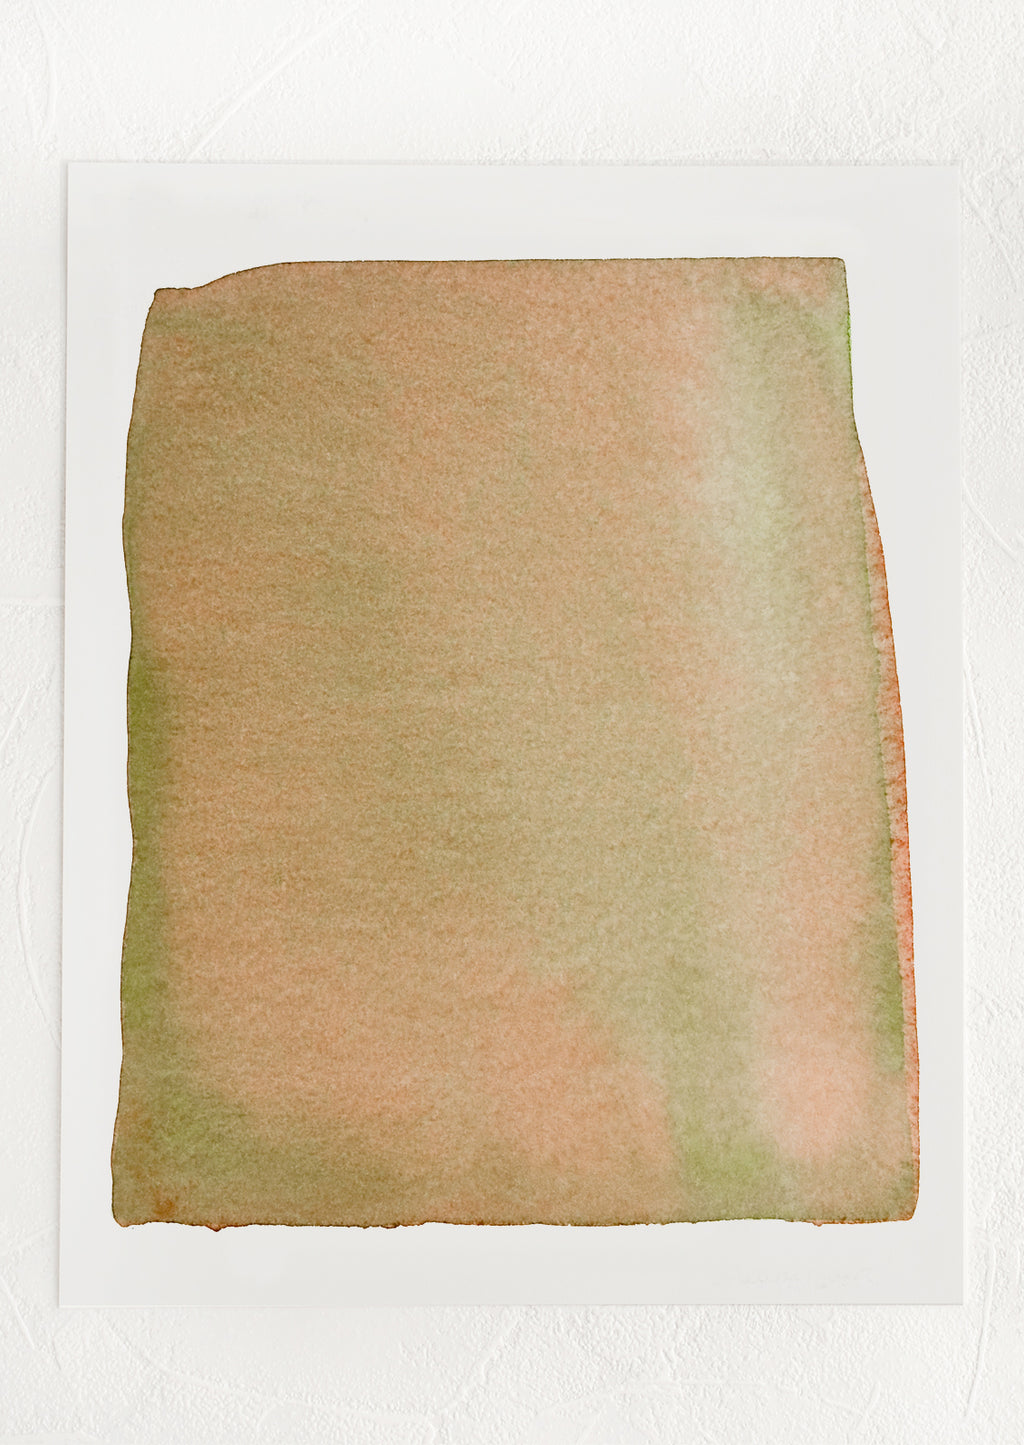 1: An art print with squared watercolor form in layered brown and olive green.